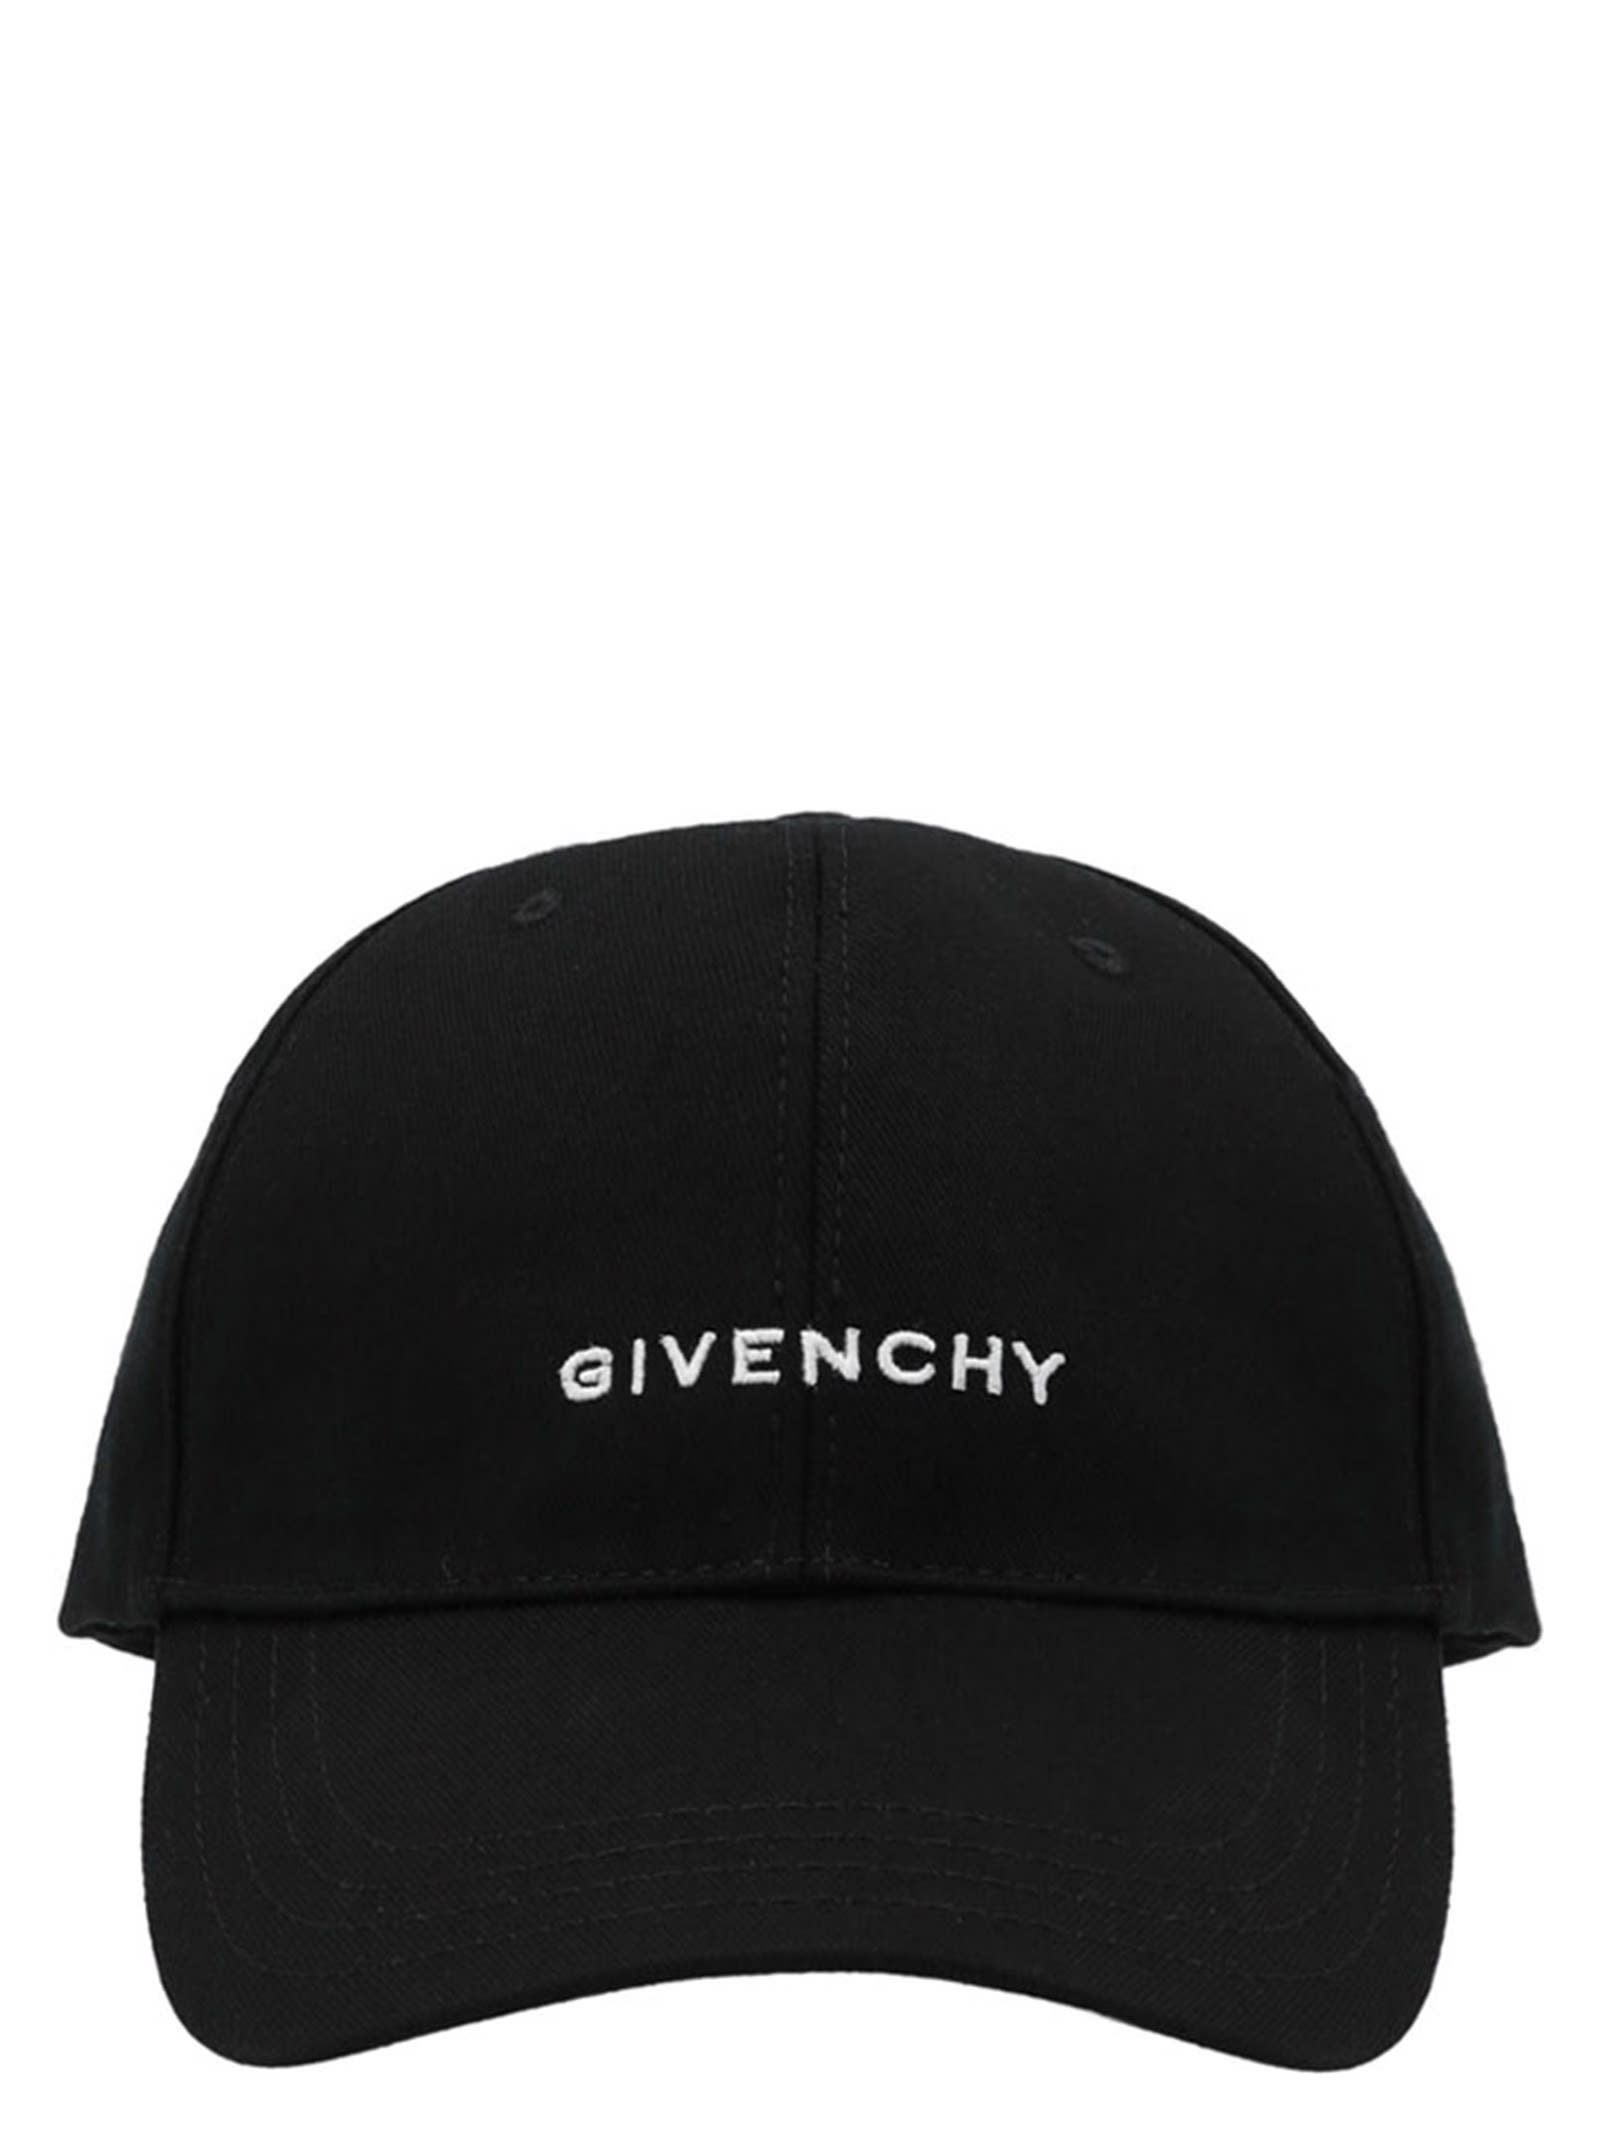 GIVENCHY CURVED CAP